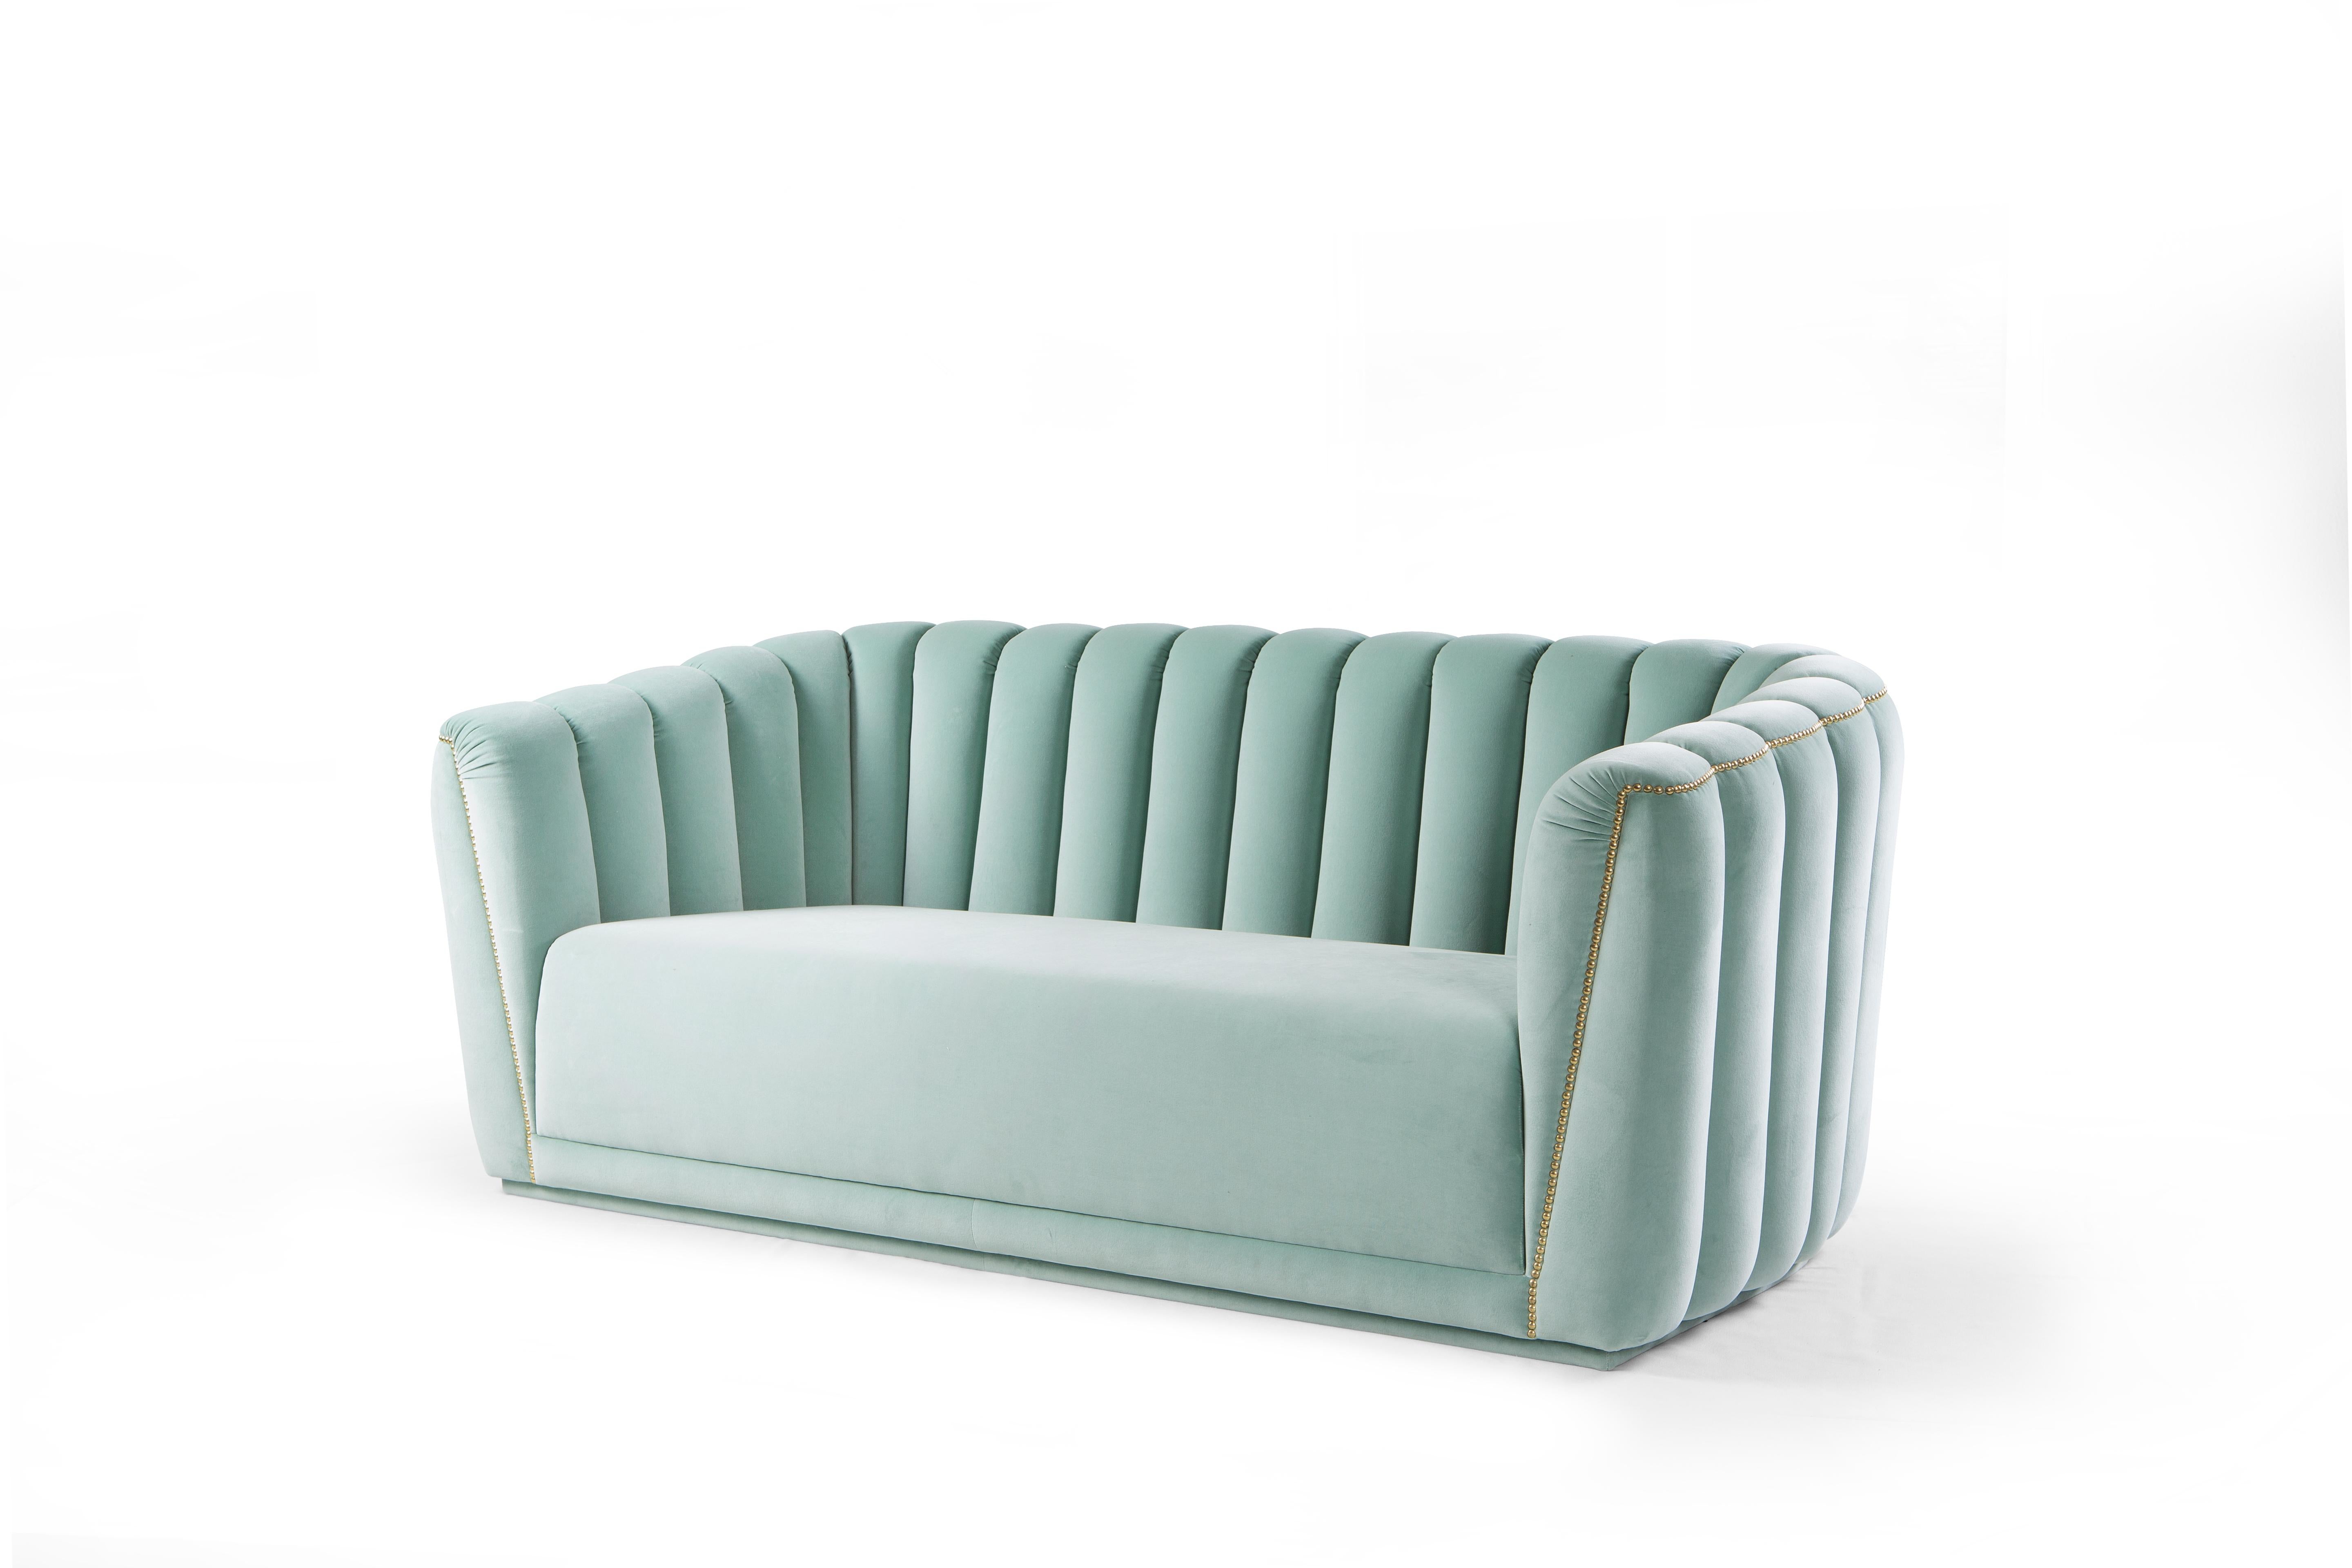 Introducing our Art Deco-inspired love seat, a timeless piece embodying Coco Chanel's philosophy: 